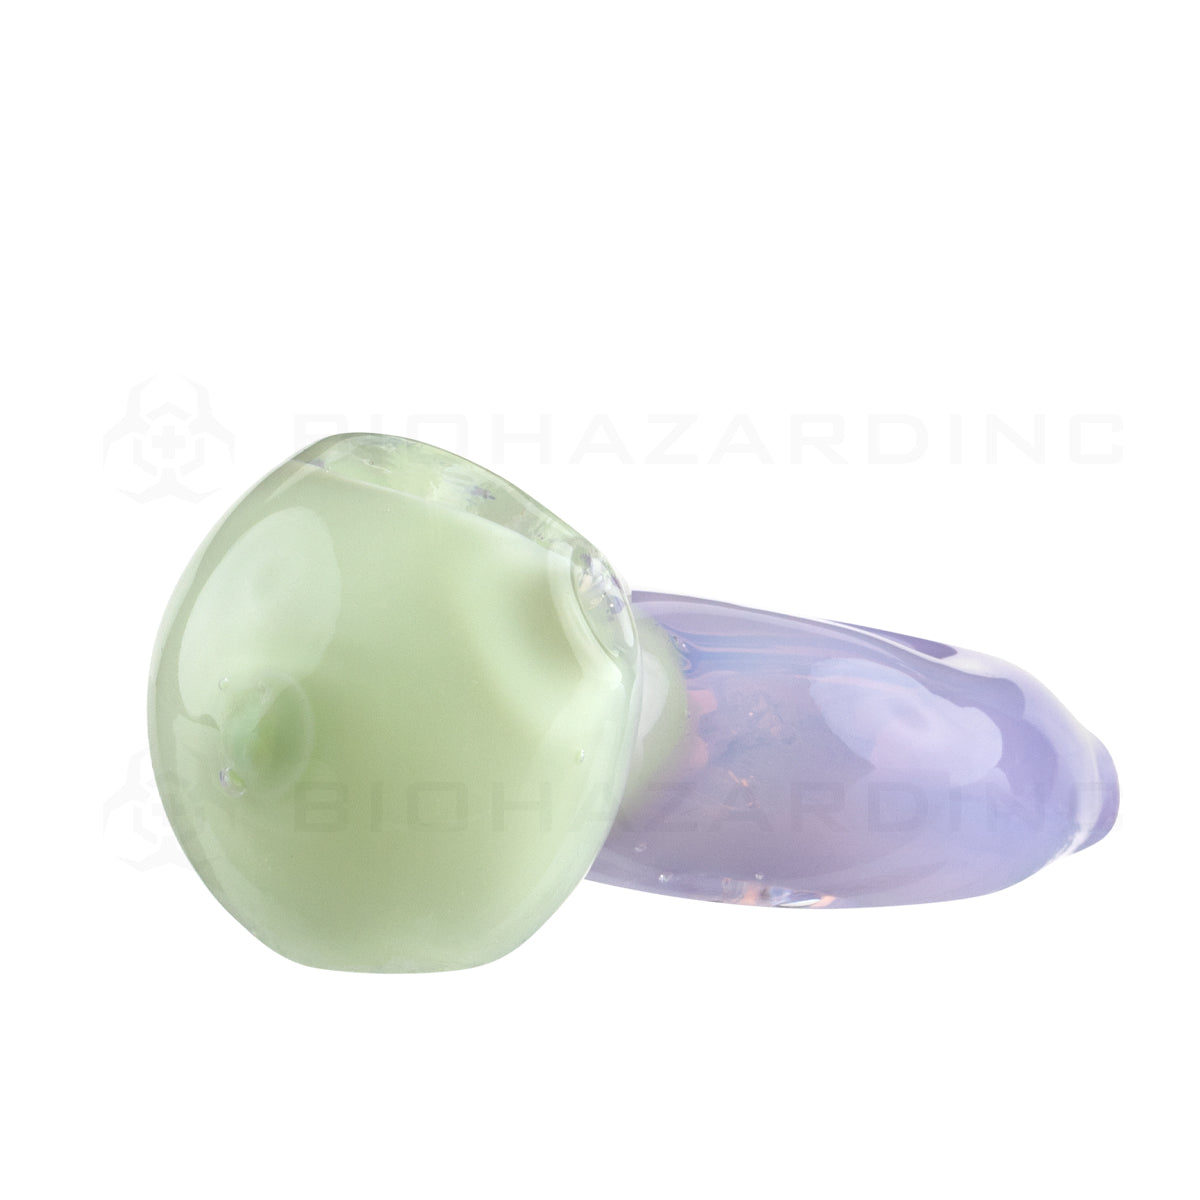 Hand Pipe | Classic Glass Spoon Two Tone Slyme Donut Hand Pipe | 3.5" - Glass - 3 Count Glass Hand Pipe Biohazard Inc   